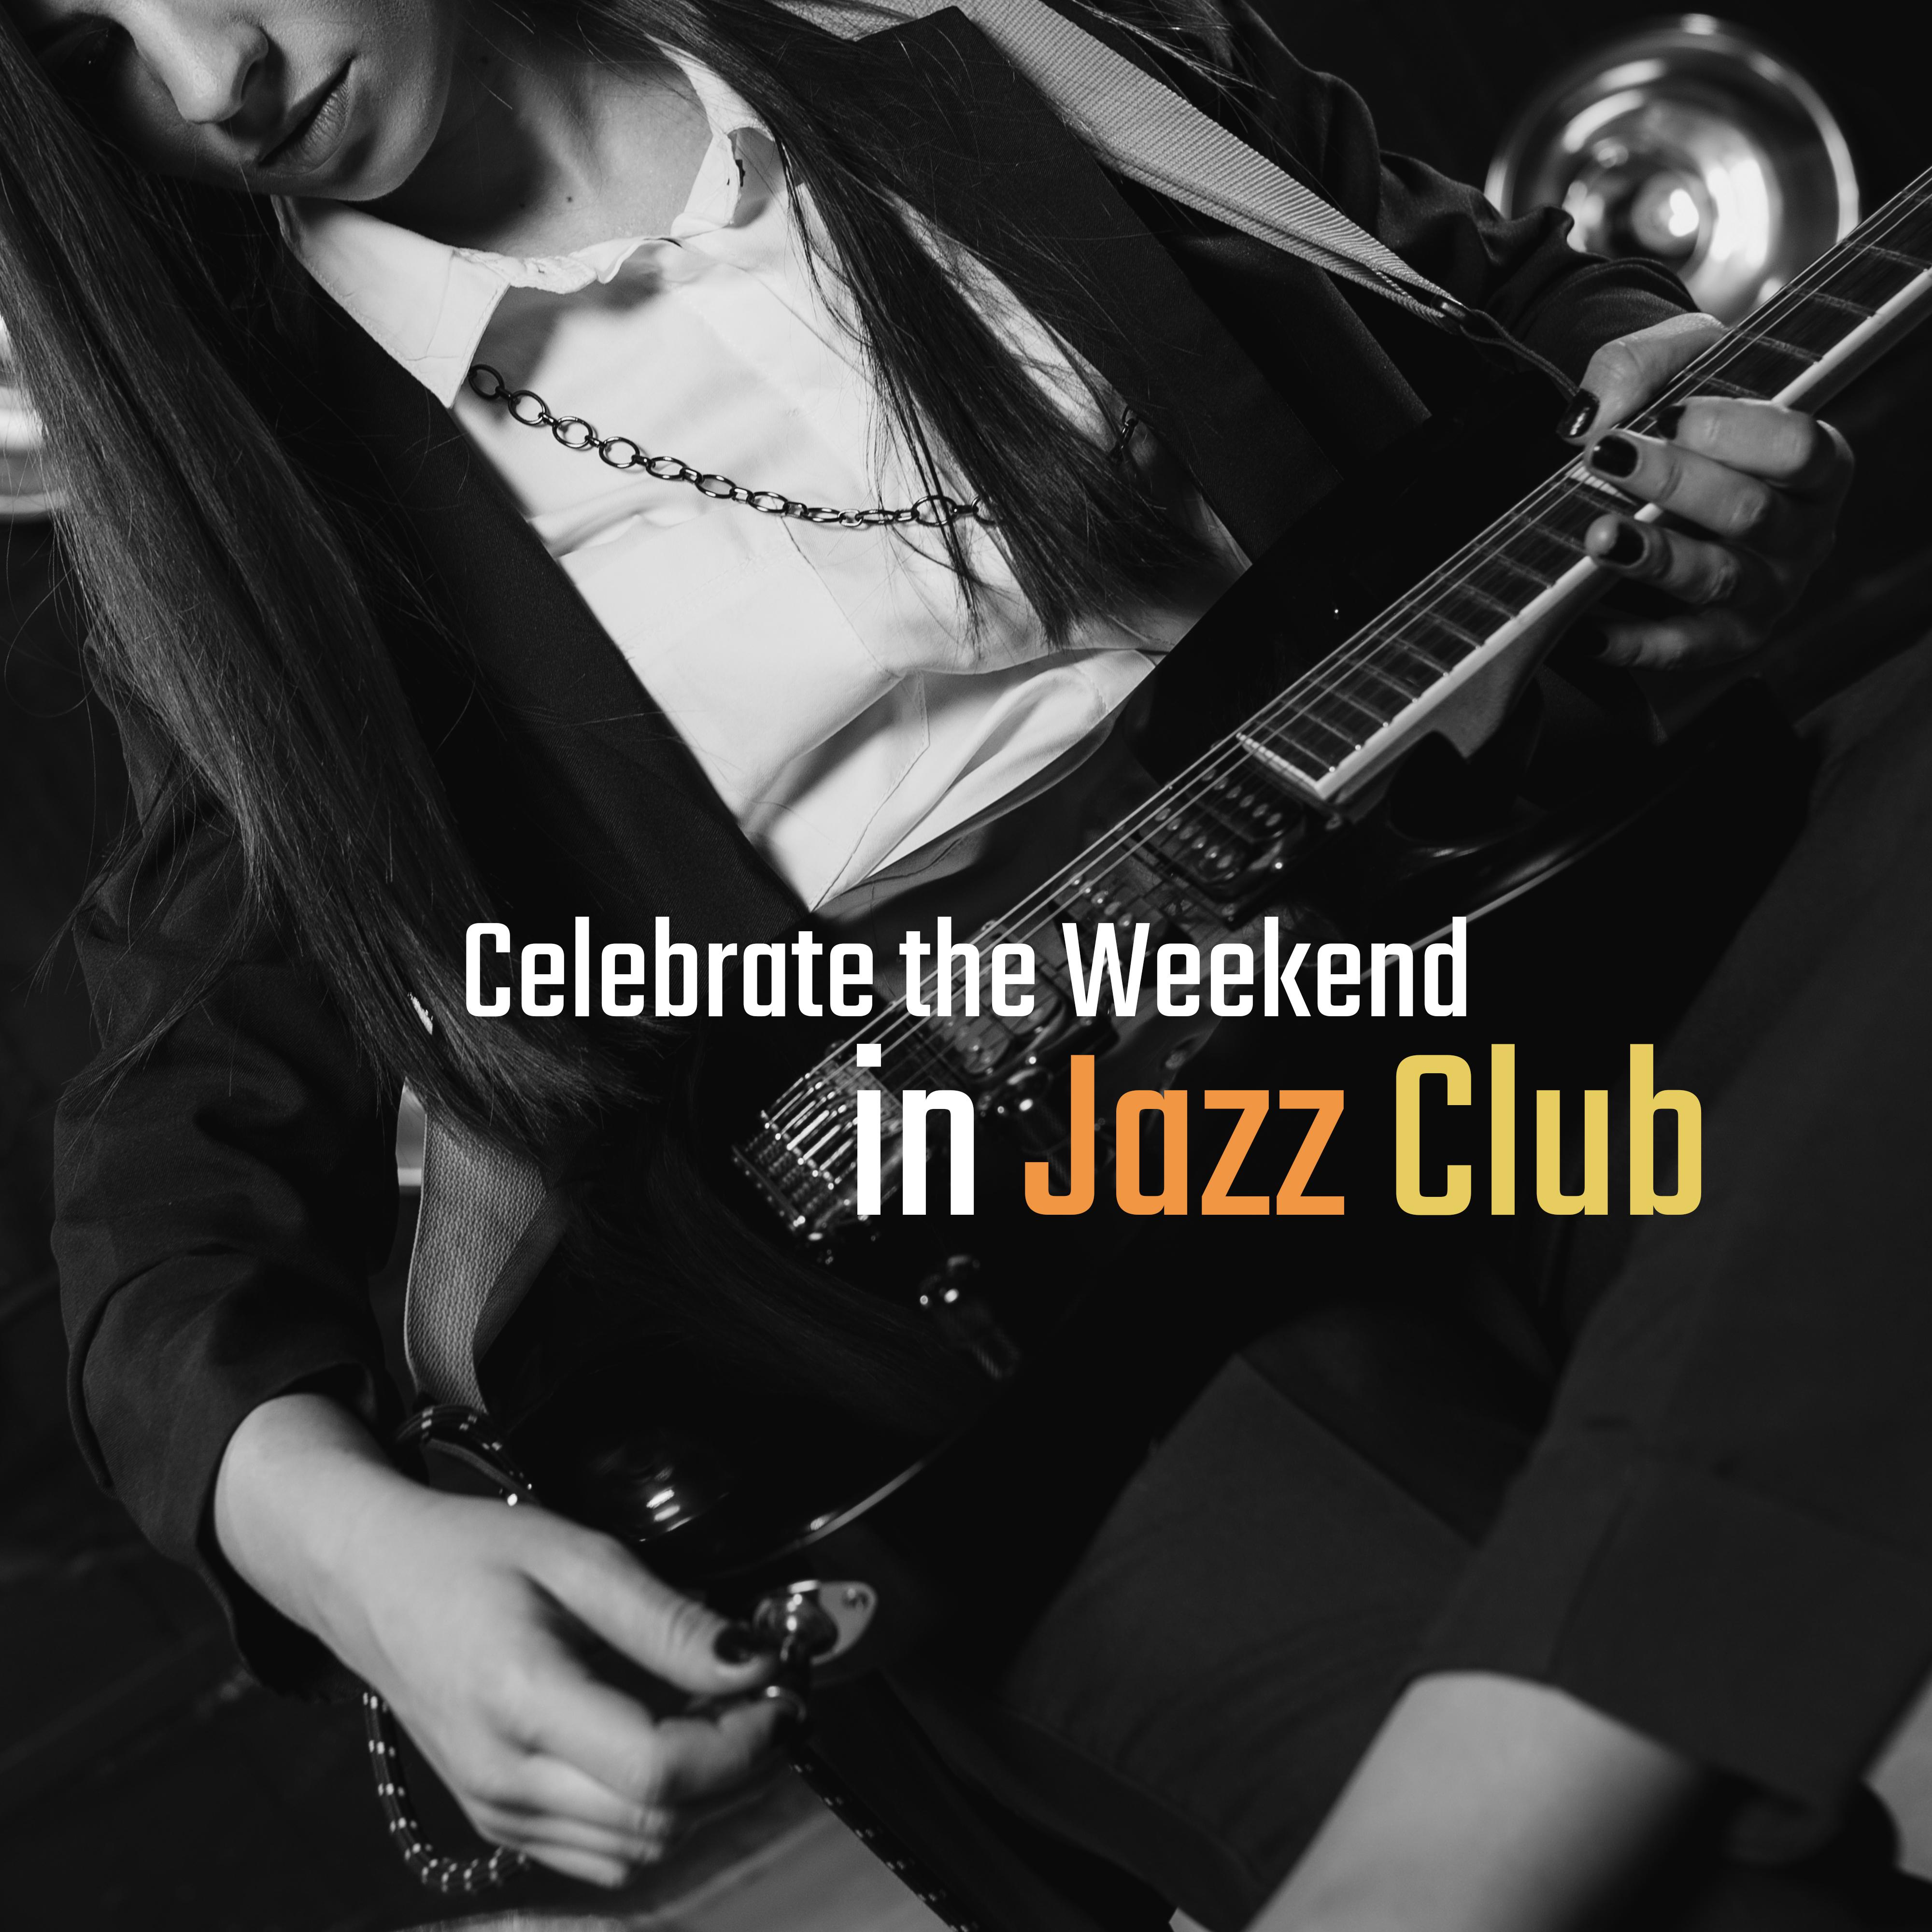 Celebrate the Weekend in Jazz Club: 2019 Smooth Jazz Music Compilation for Nice Time Spending with Friends, Instrumental Songs with Sounds of Contrabass, Piano, Sax, Guitar & More